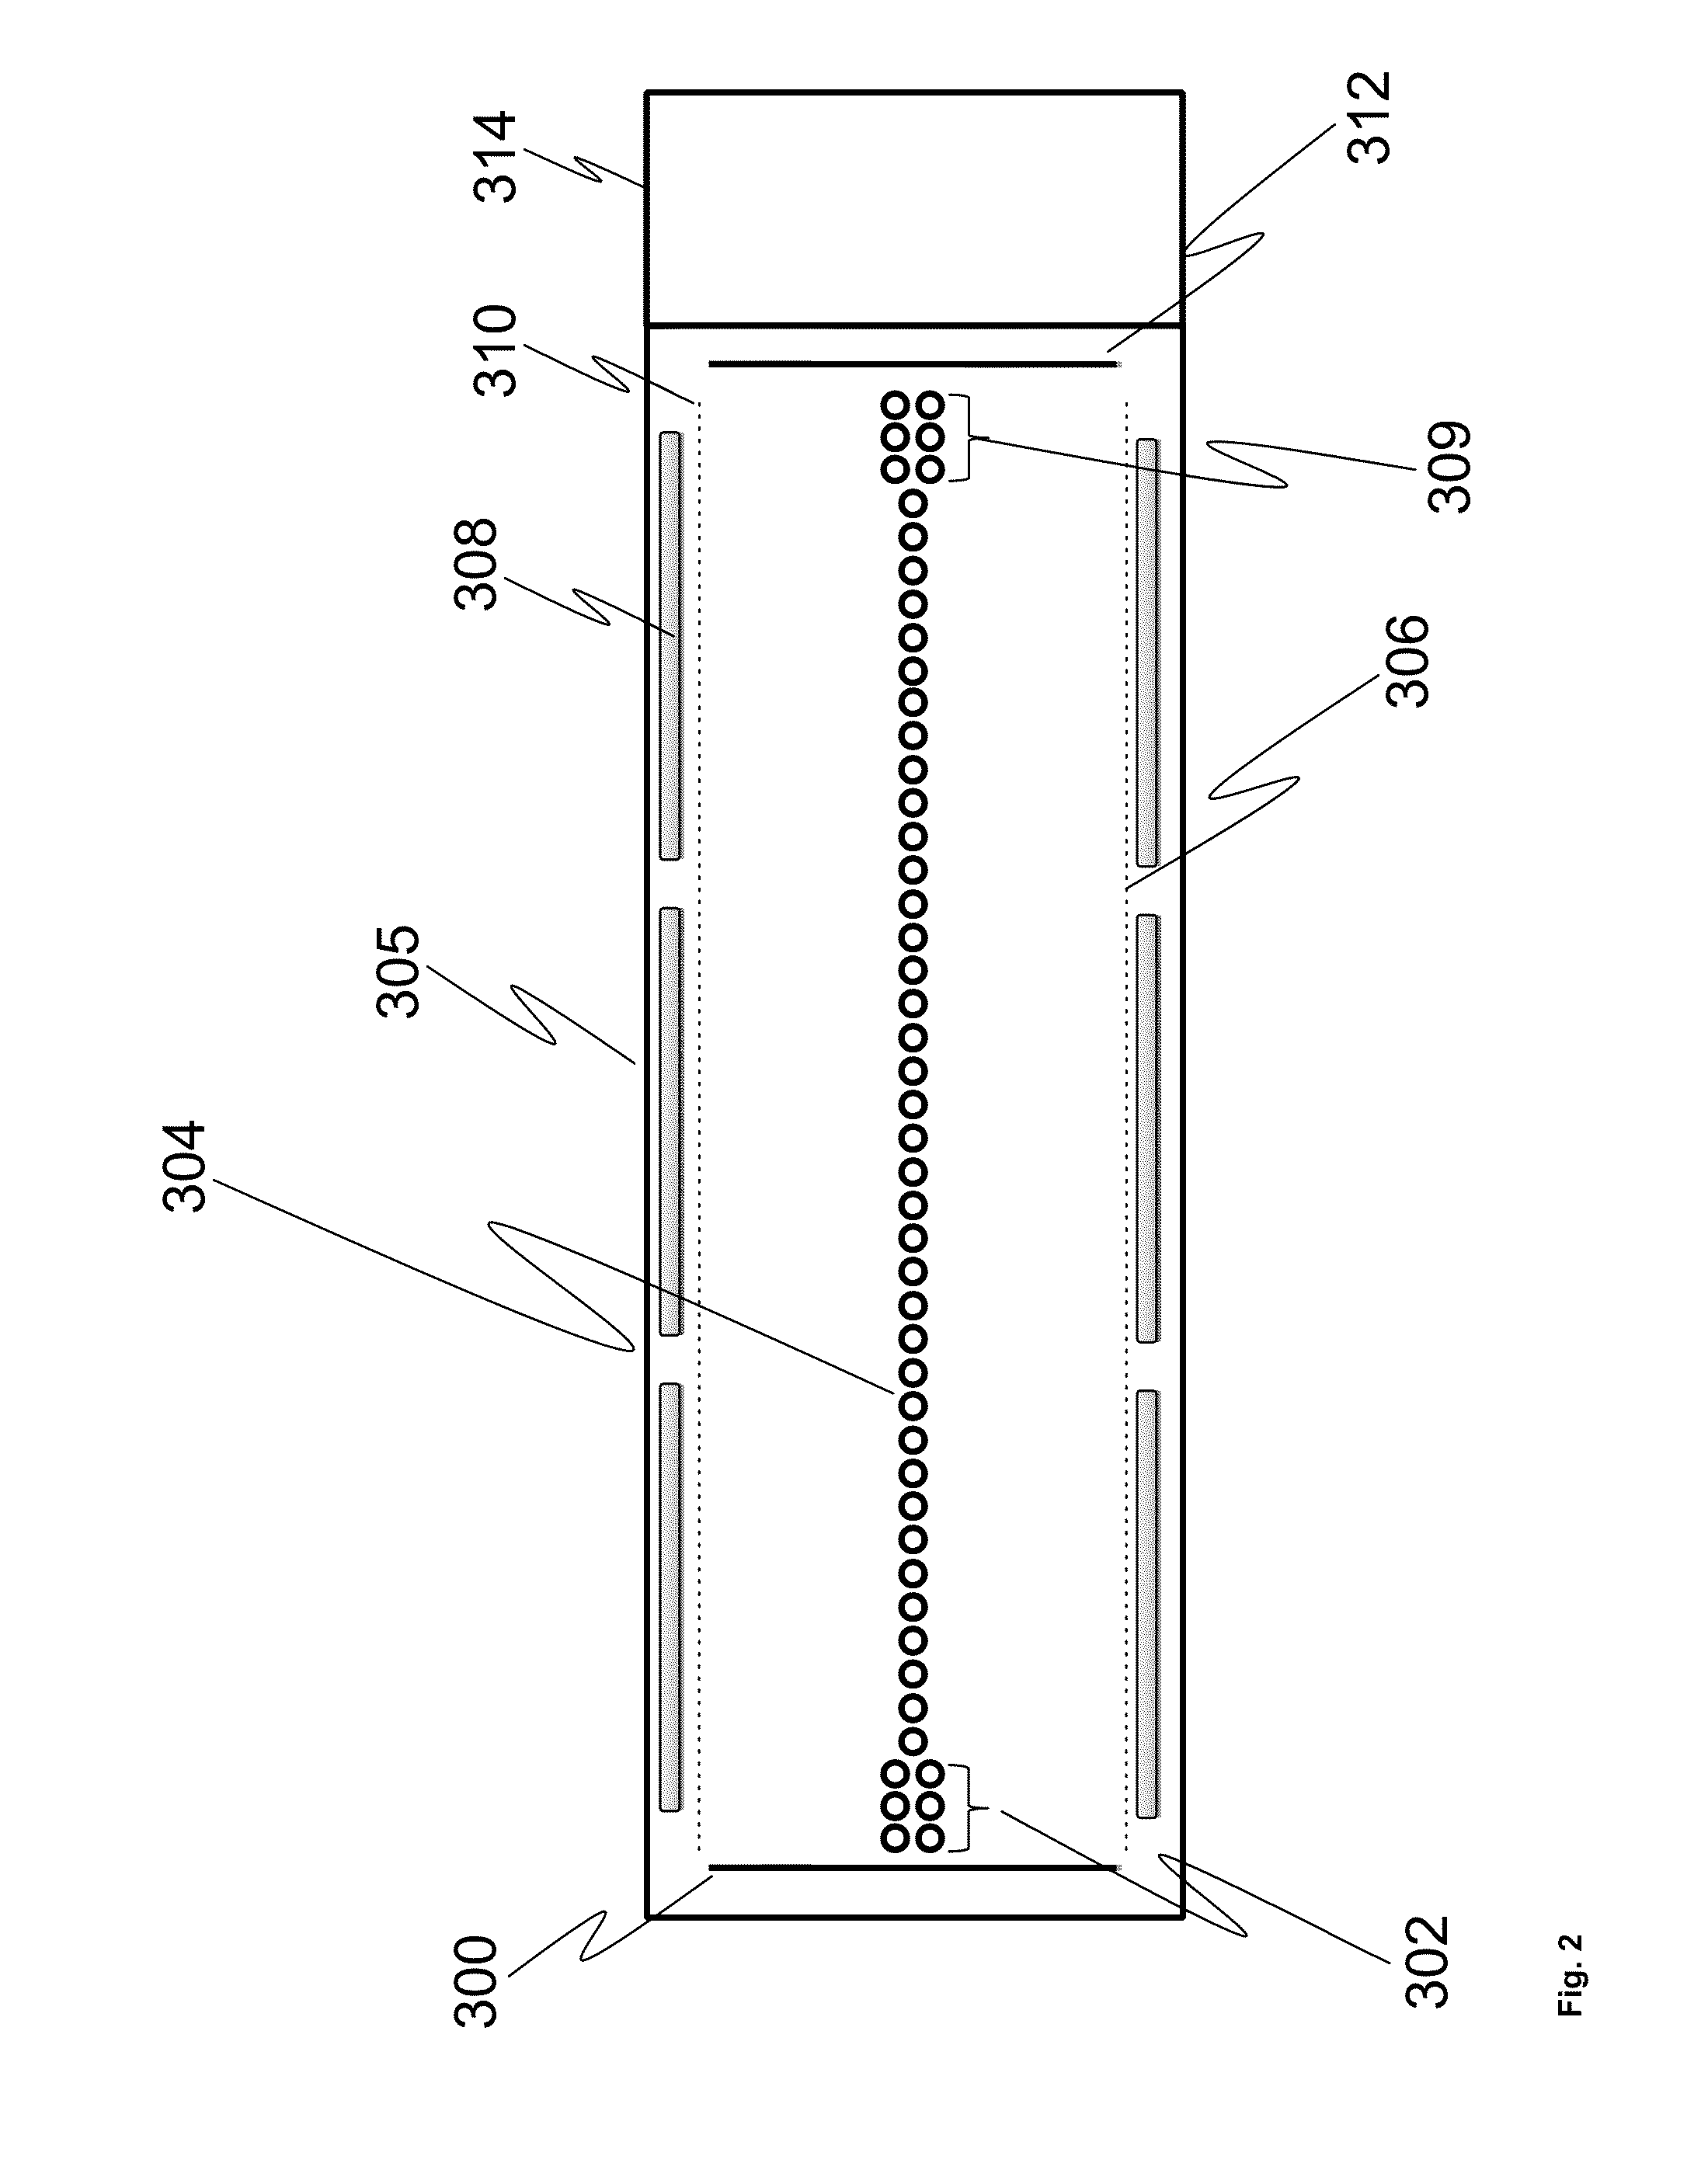 Ultraviolet light exposure chamber for photovoltaic modules